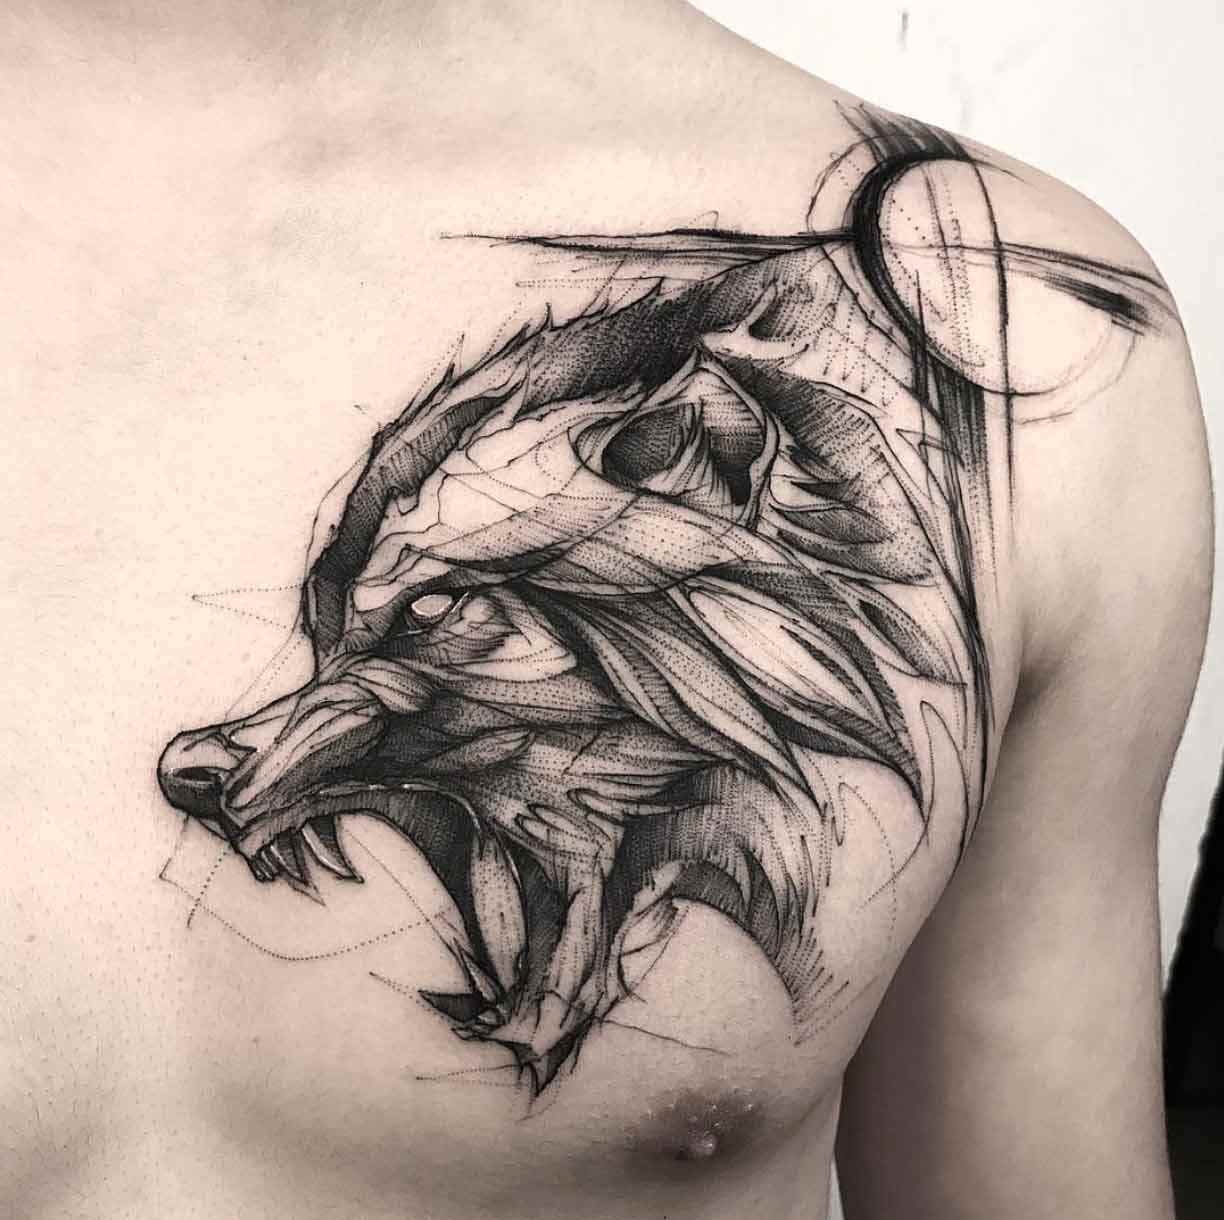 All You Wish To Know About Sketch Tattoos - TattoosWin